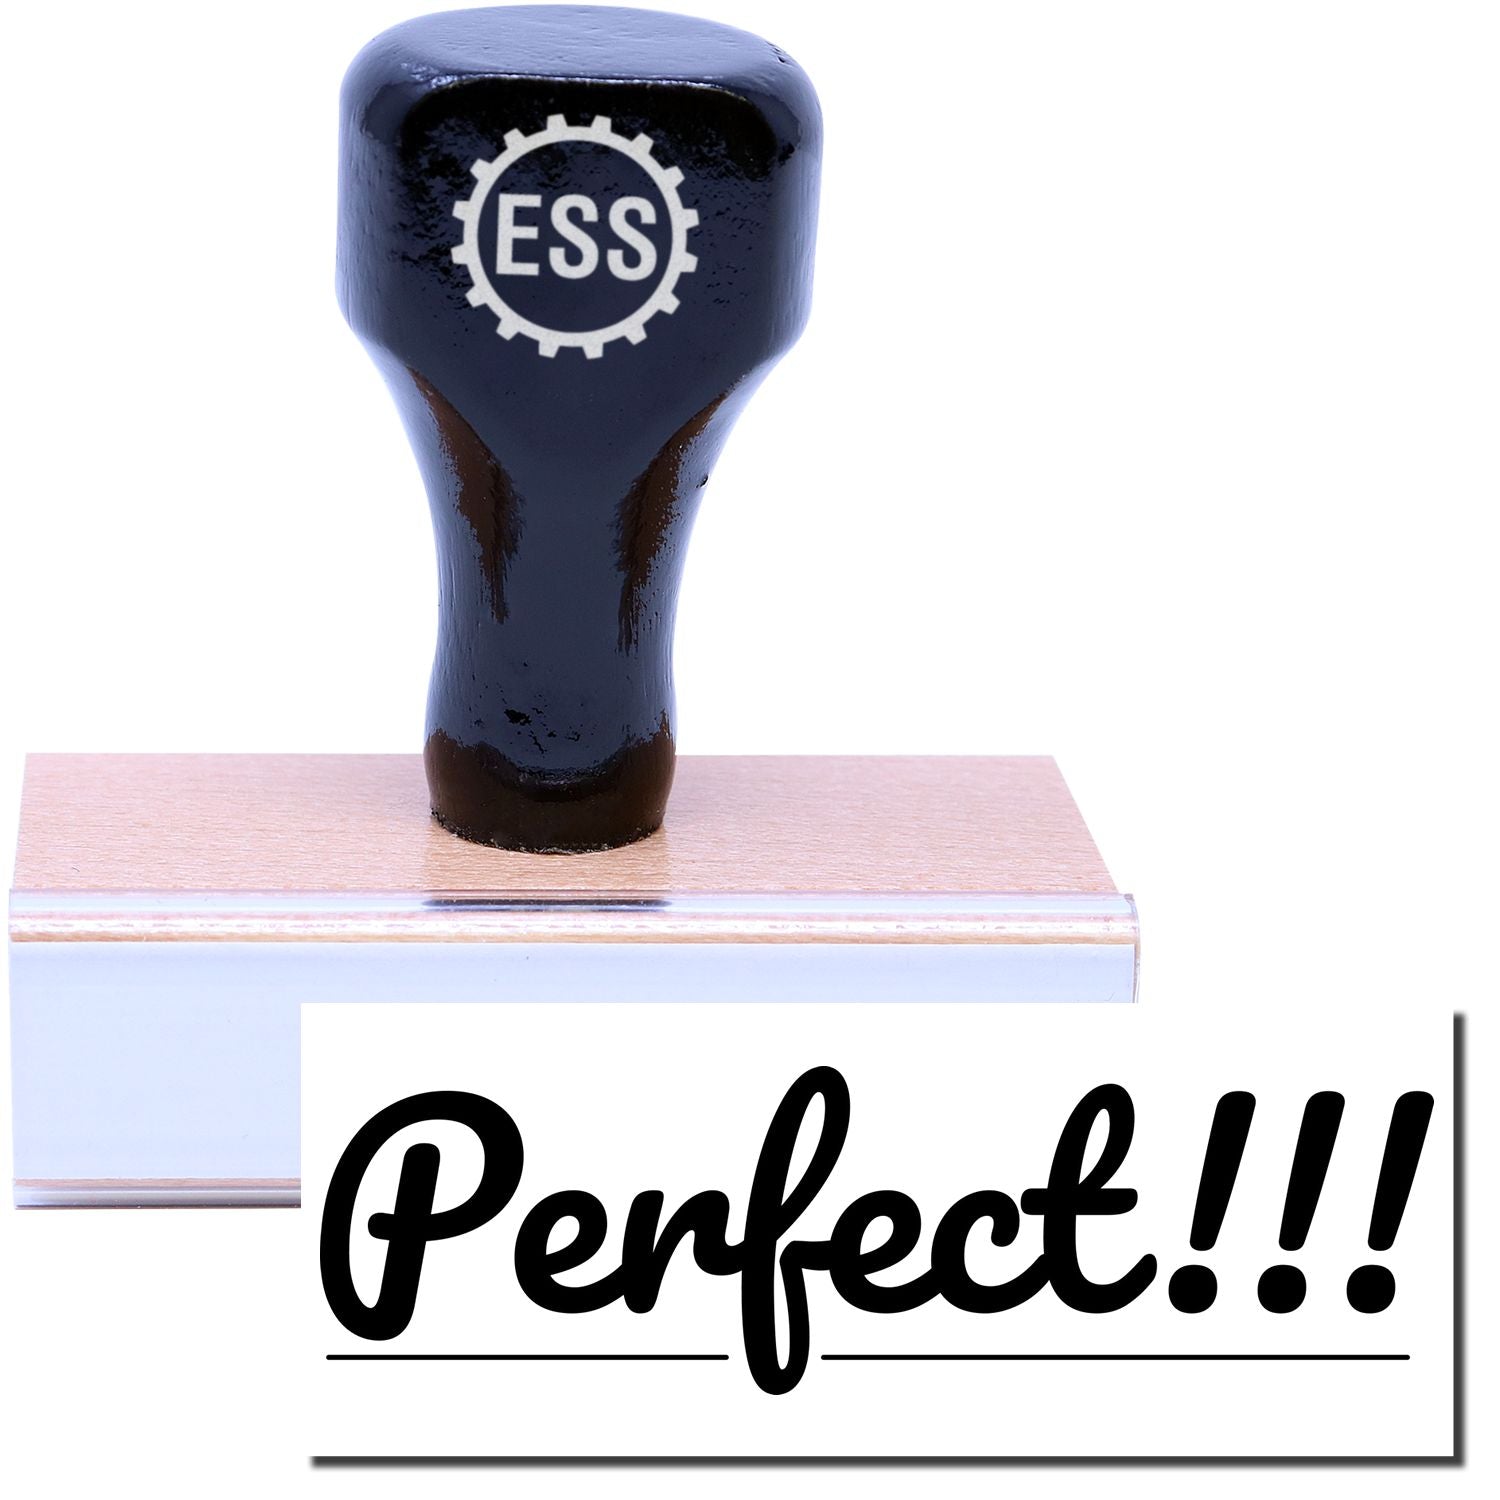 A stock office rubber stamp with a stamped image showing how the text "Perfect!!!" in a large cursive bold font with three exclamation signs at the end is displayed after stamping.